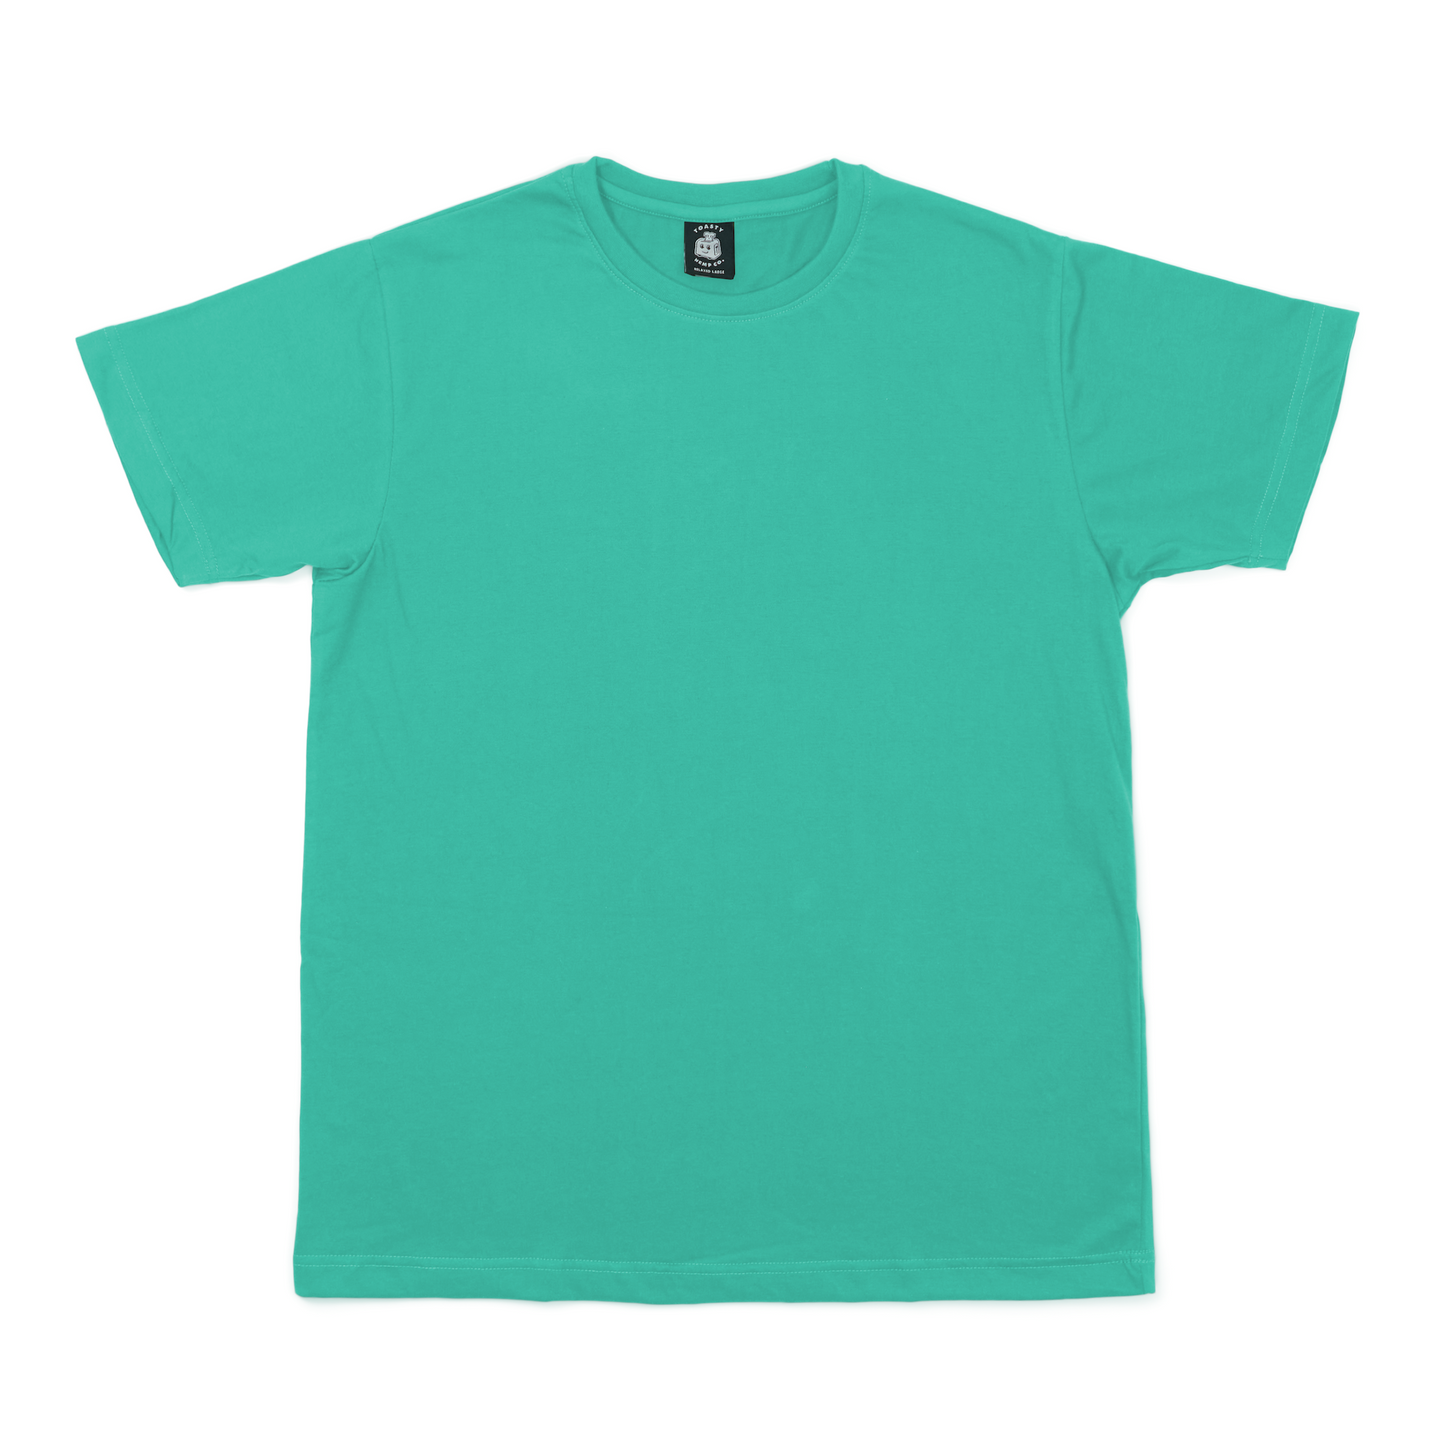 Relaxed Fit Hemp Tee - Teal